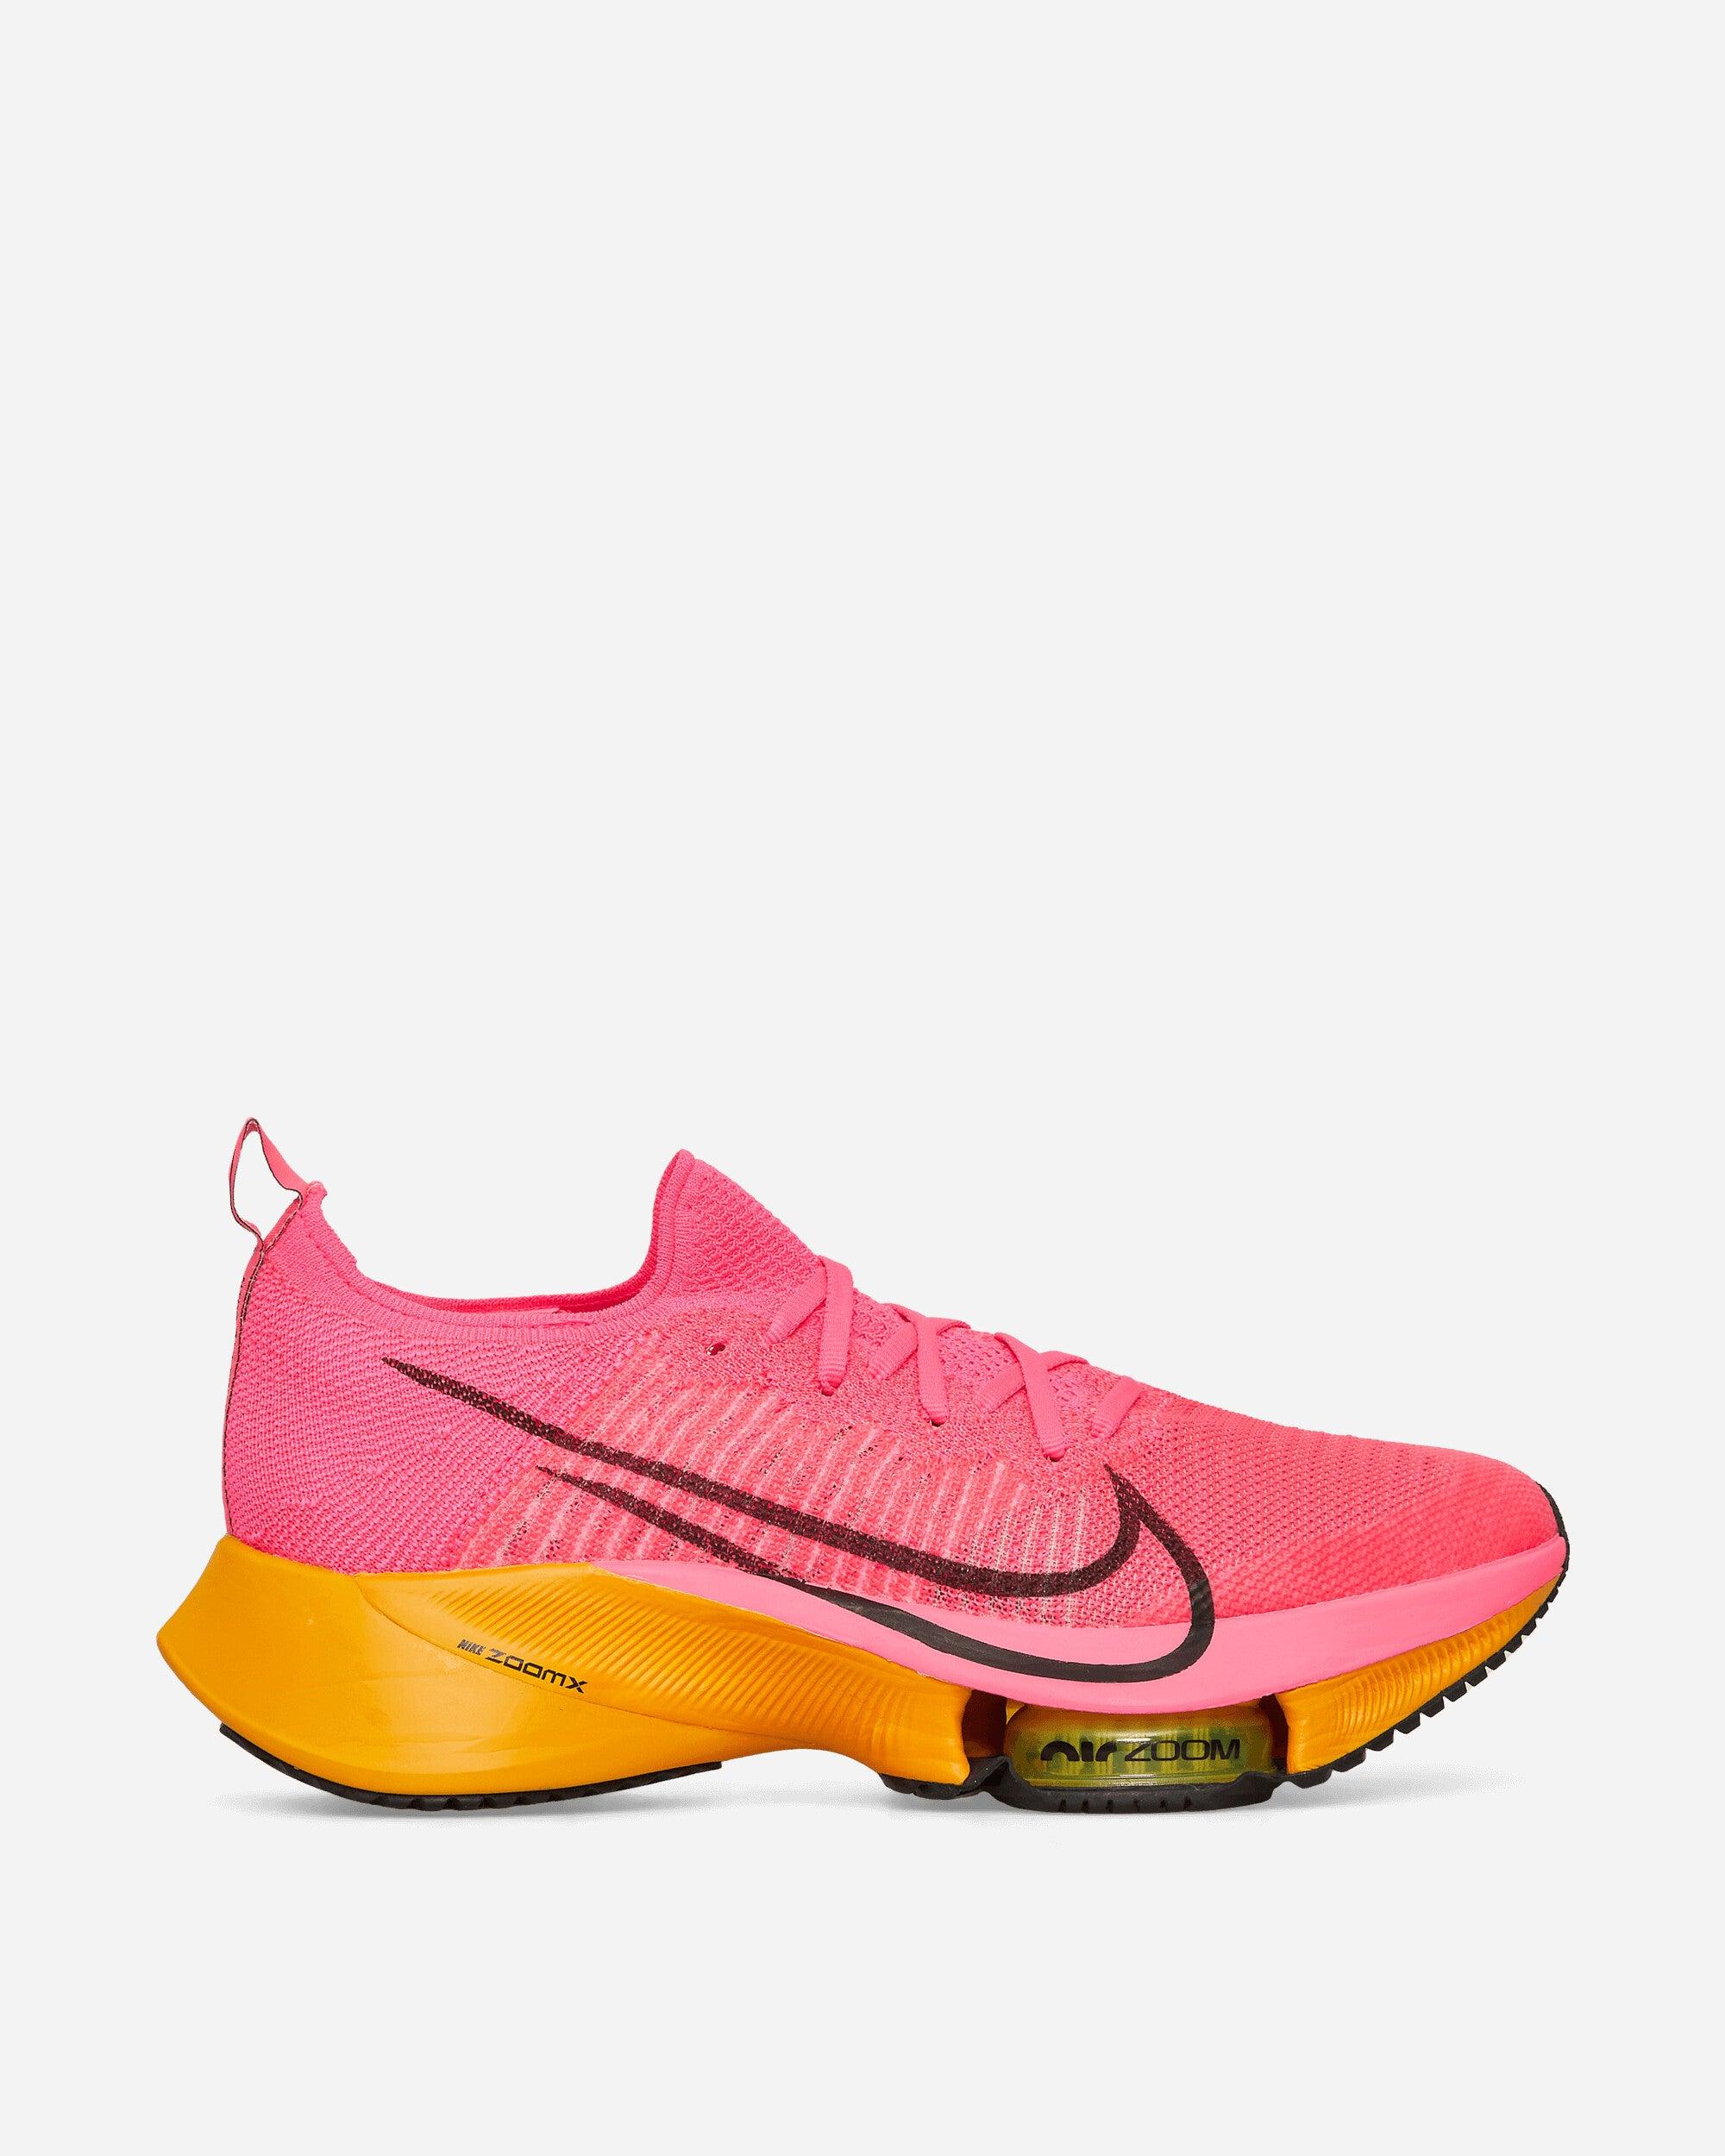 Nike Air Tempo Flyknit Sneakers Hyper Pink / Laser Orange for Lyst